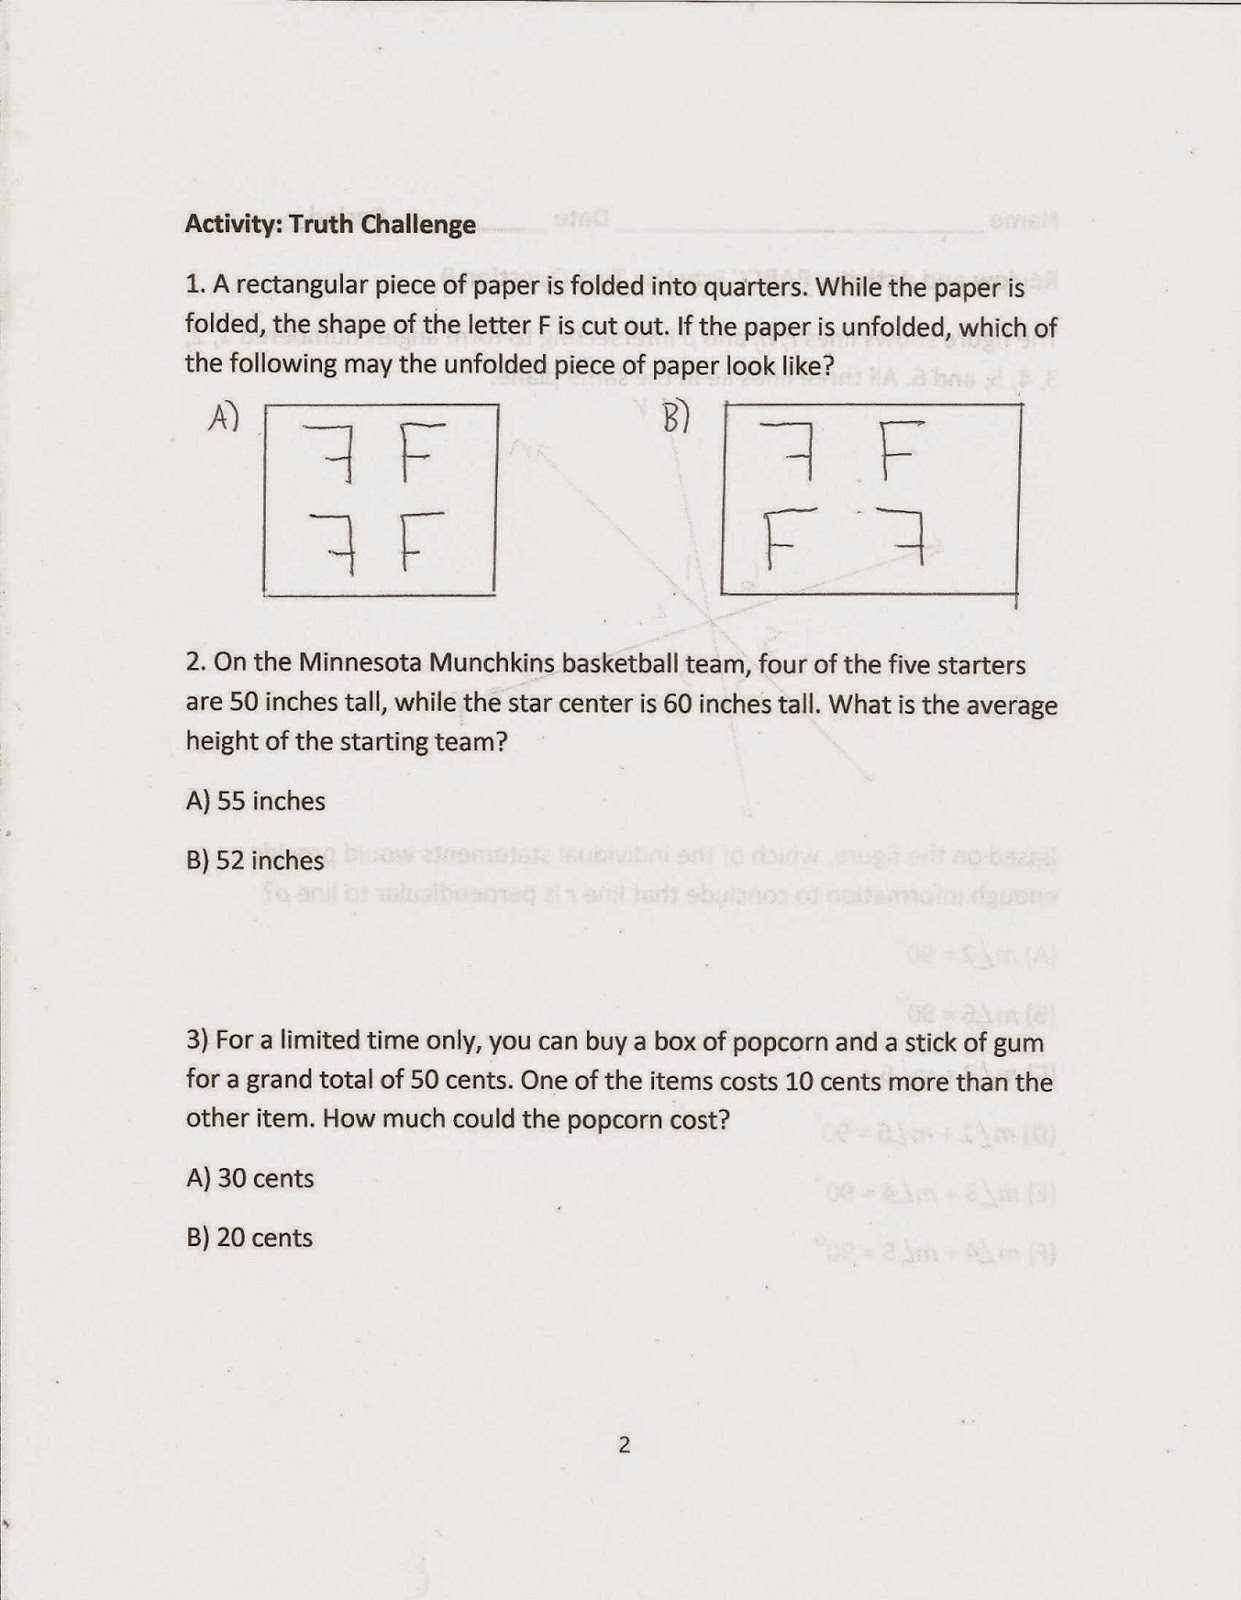 Glencoe Geometry Chapter 4 Worksheet Answers as Well as Geometry Mon Core Style April 2015